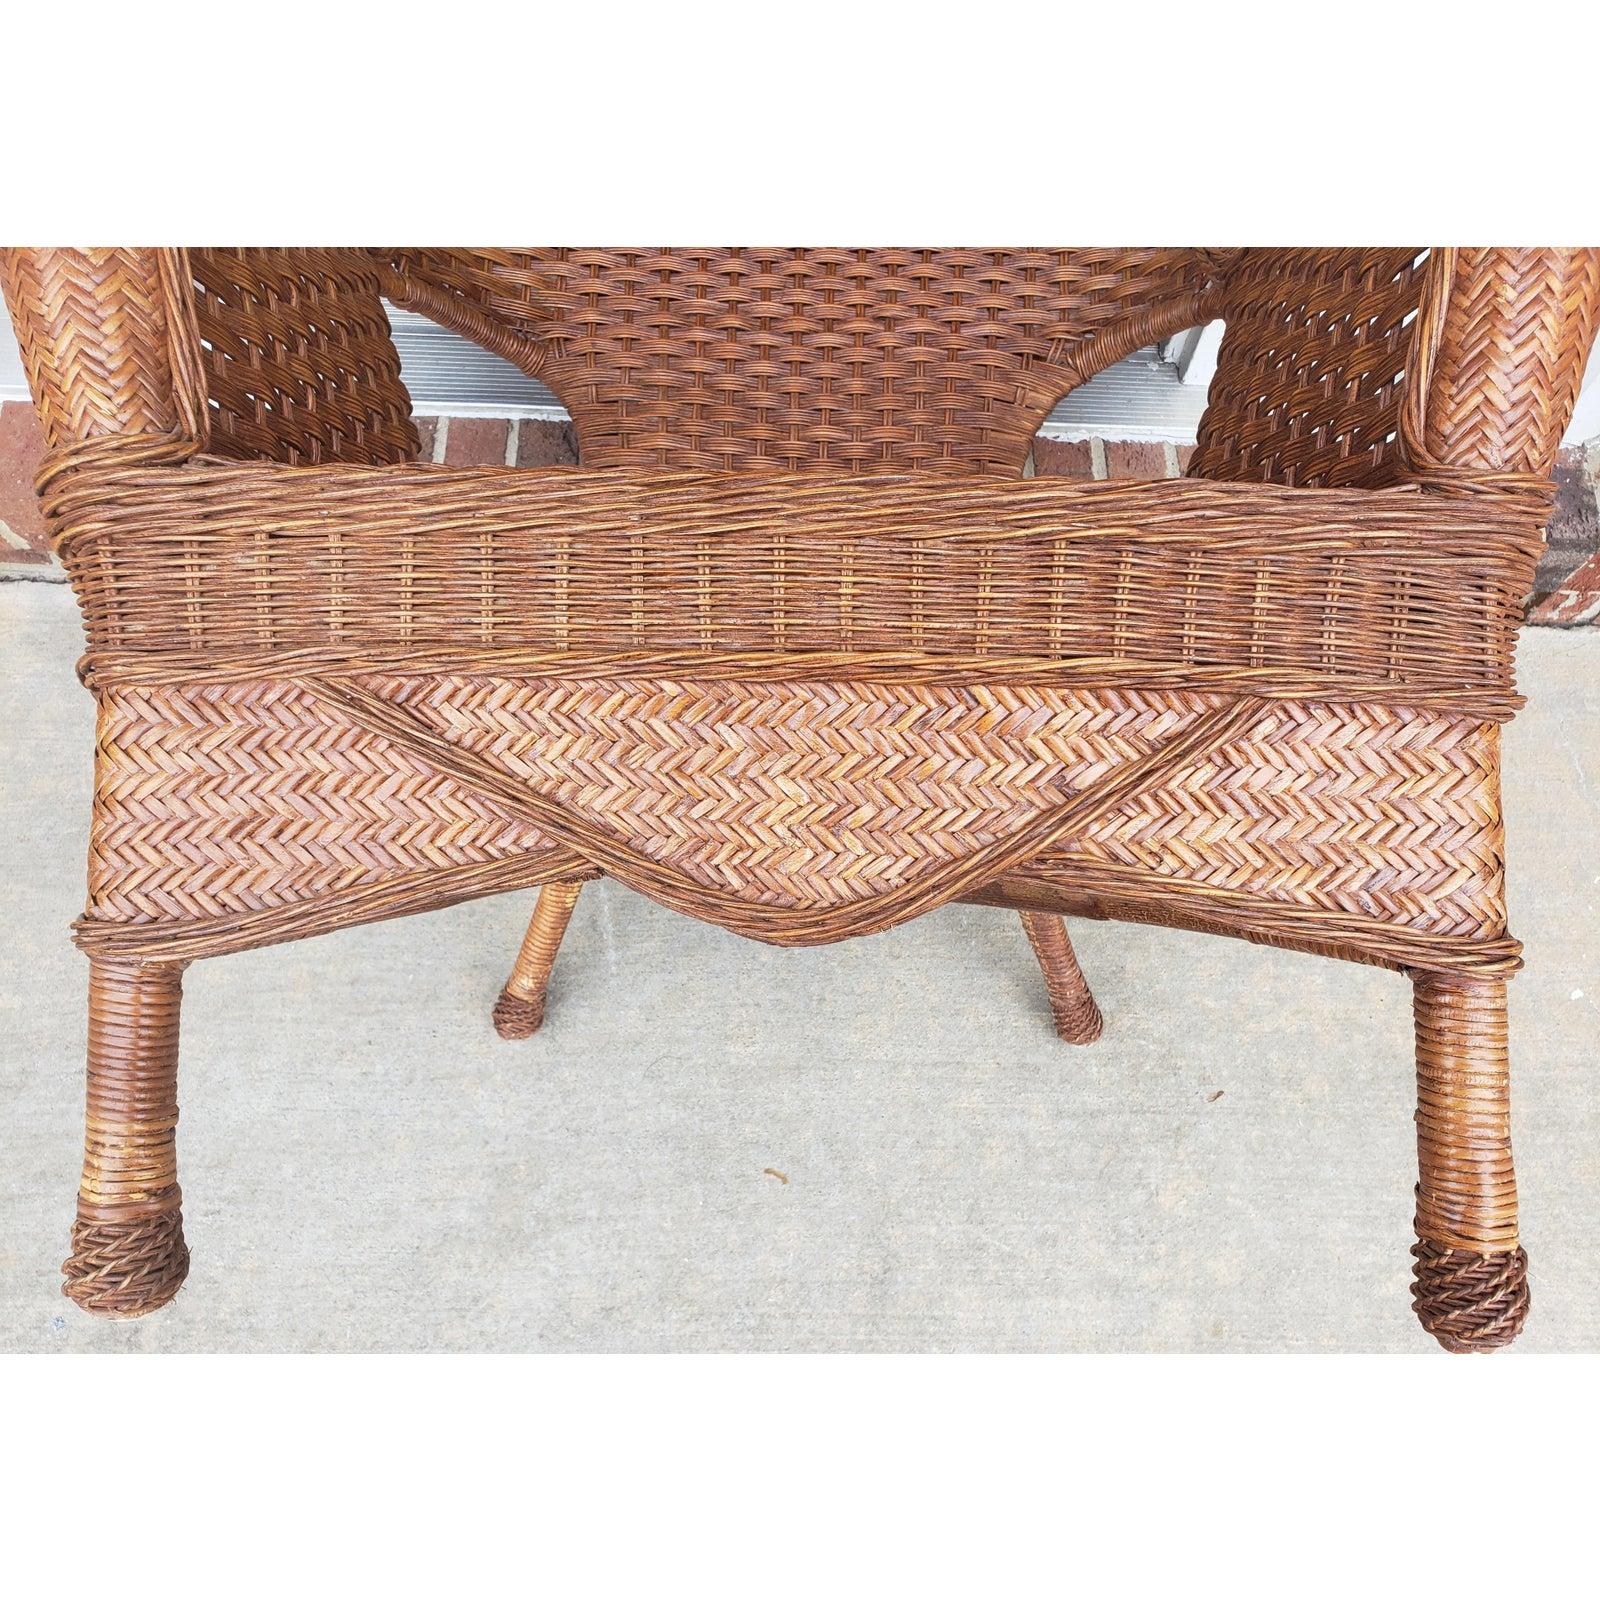 20th Century 1960s Vintage Wicker Rattan Loveseat and Chair Set in Floral Upholstery, 2 Pieces